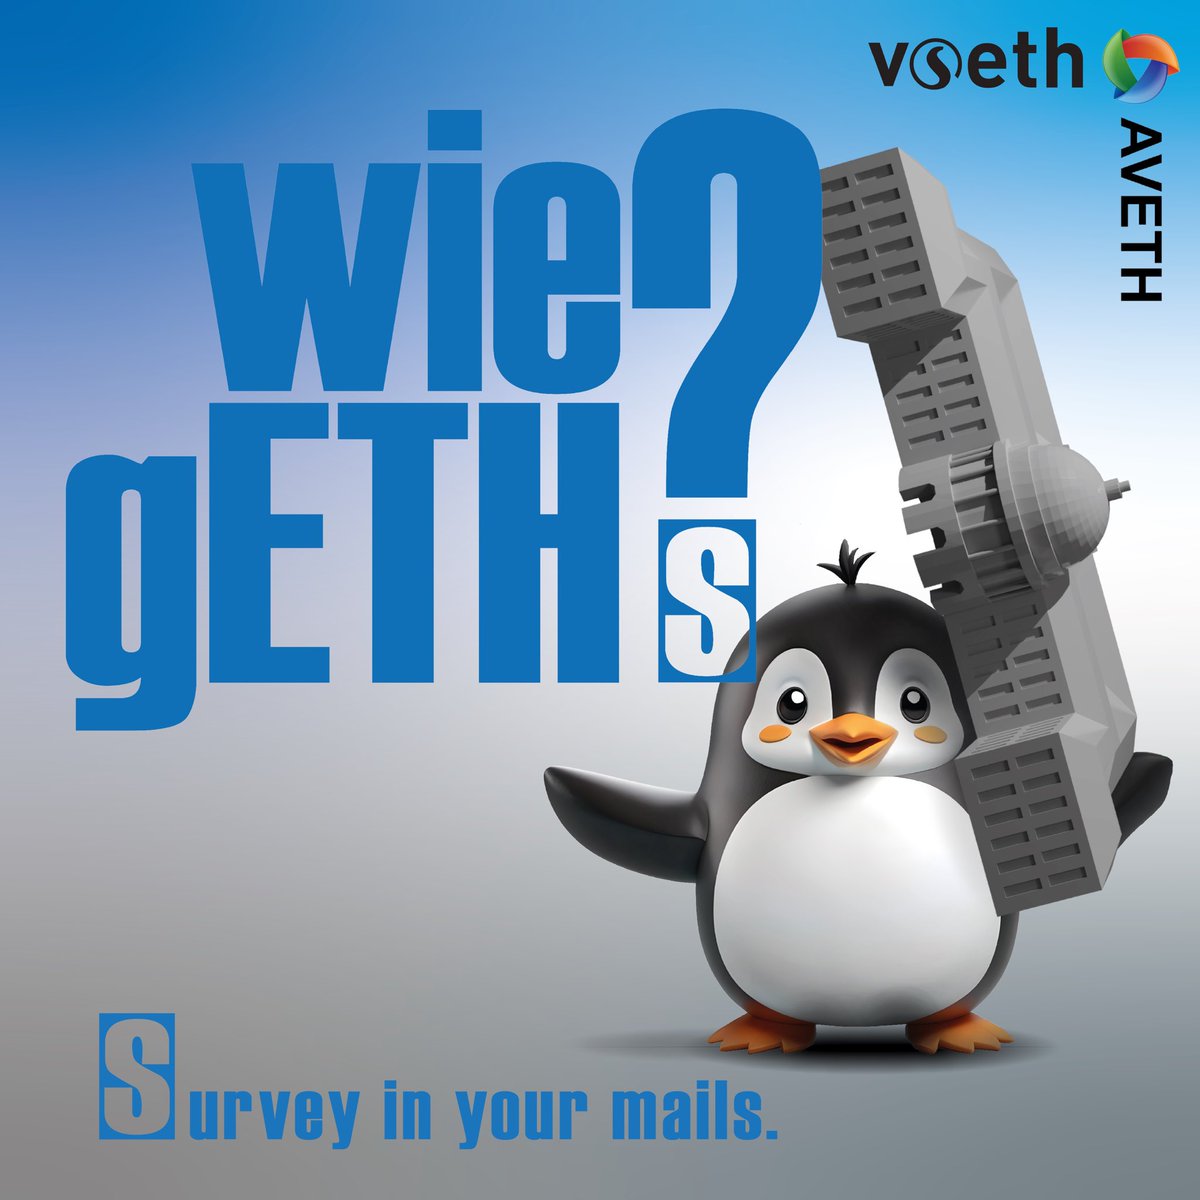 Haven't filled out the wiegETHs survey yet? It's not too late to contribute your thoughts on mental well-being at ETH. Access the survey via your ETH email. Let's work together for a better ETH. #wiegETHs #MentalHealthMatters